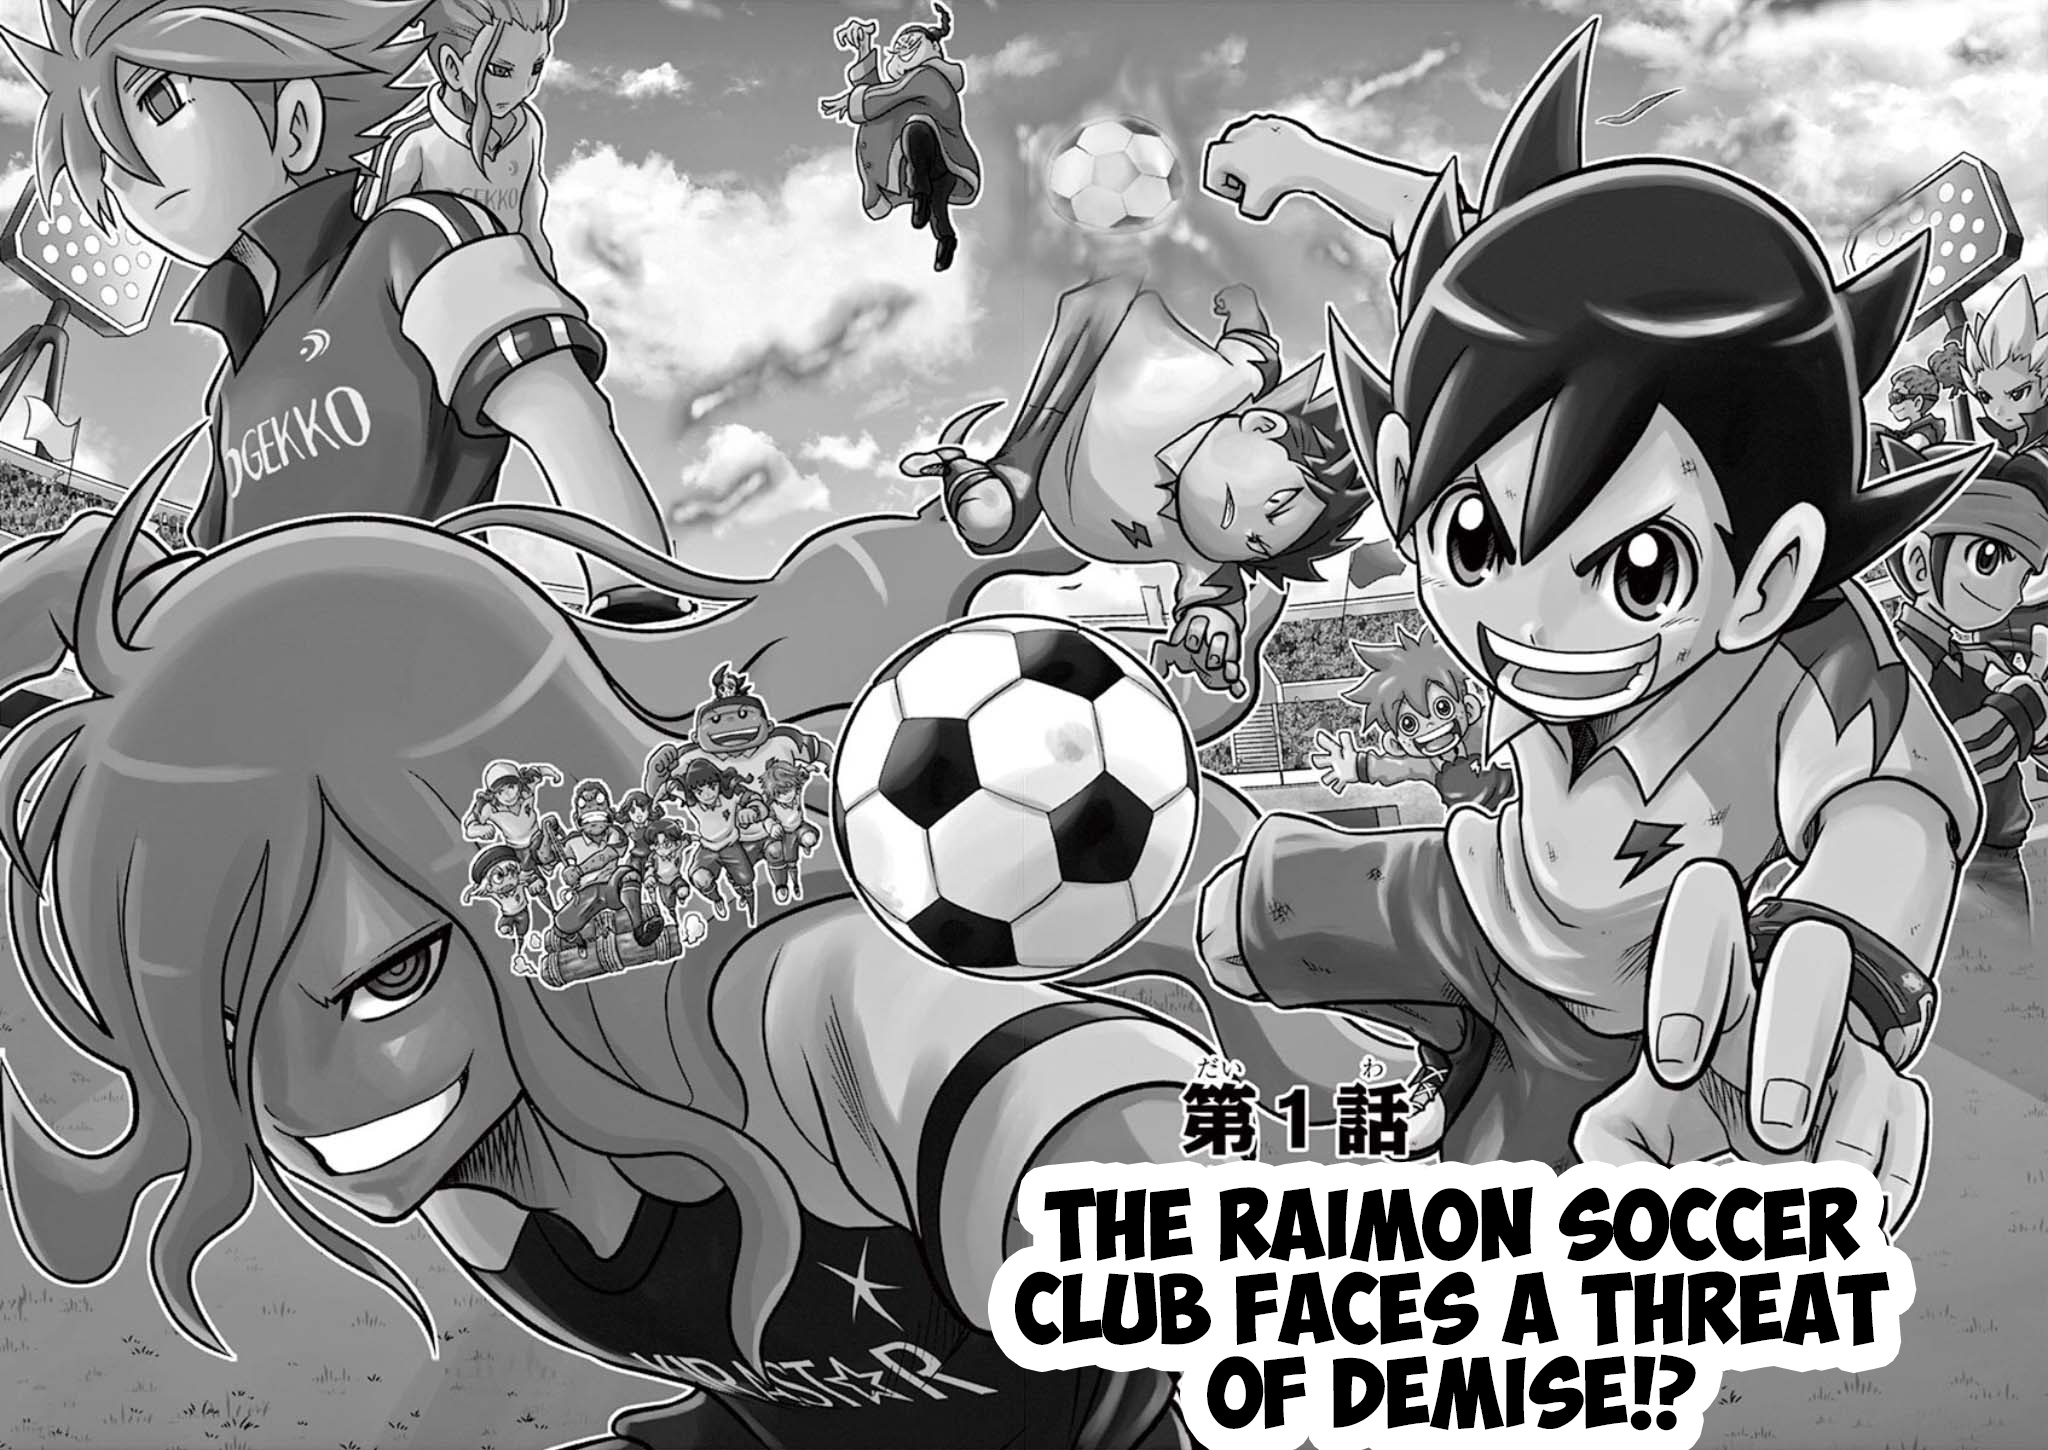 Inazuma Eleven: Ares No Tenbin Vol.1 Chapter 1: The Raimon Soccer Club Faces A Threat Of Demise!? - Picture 1